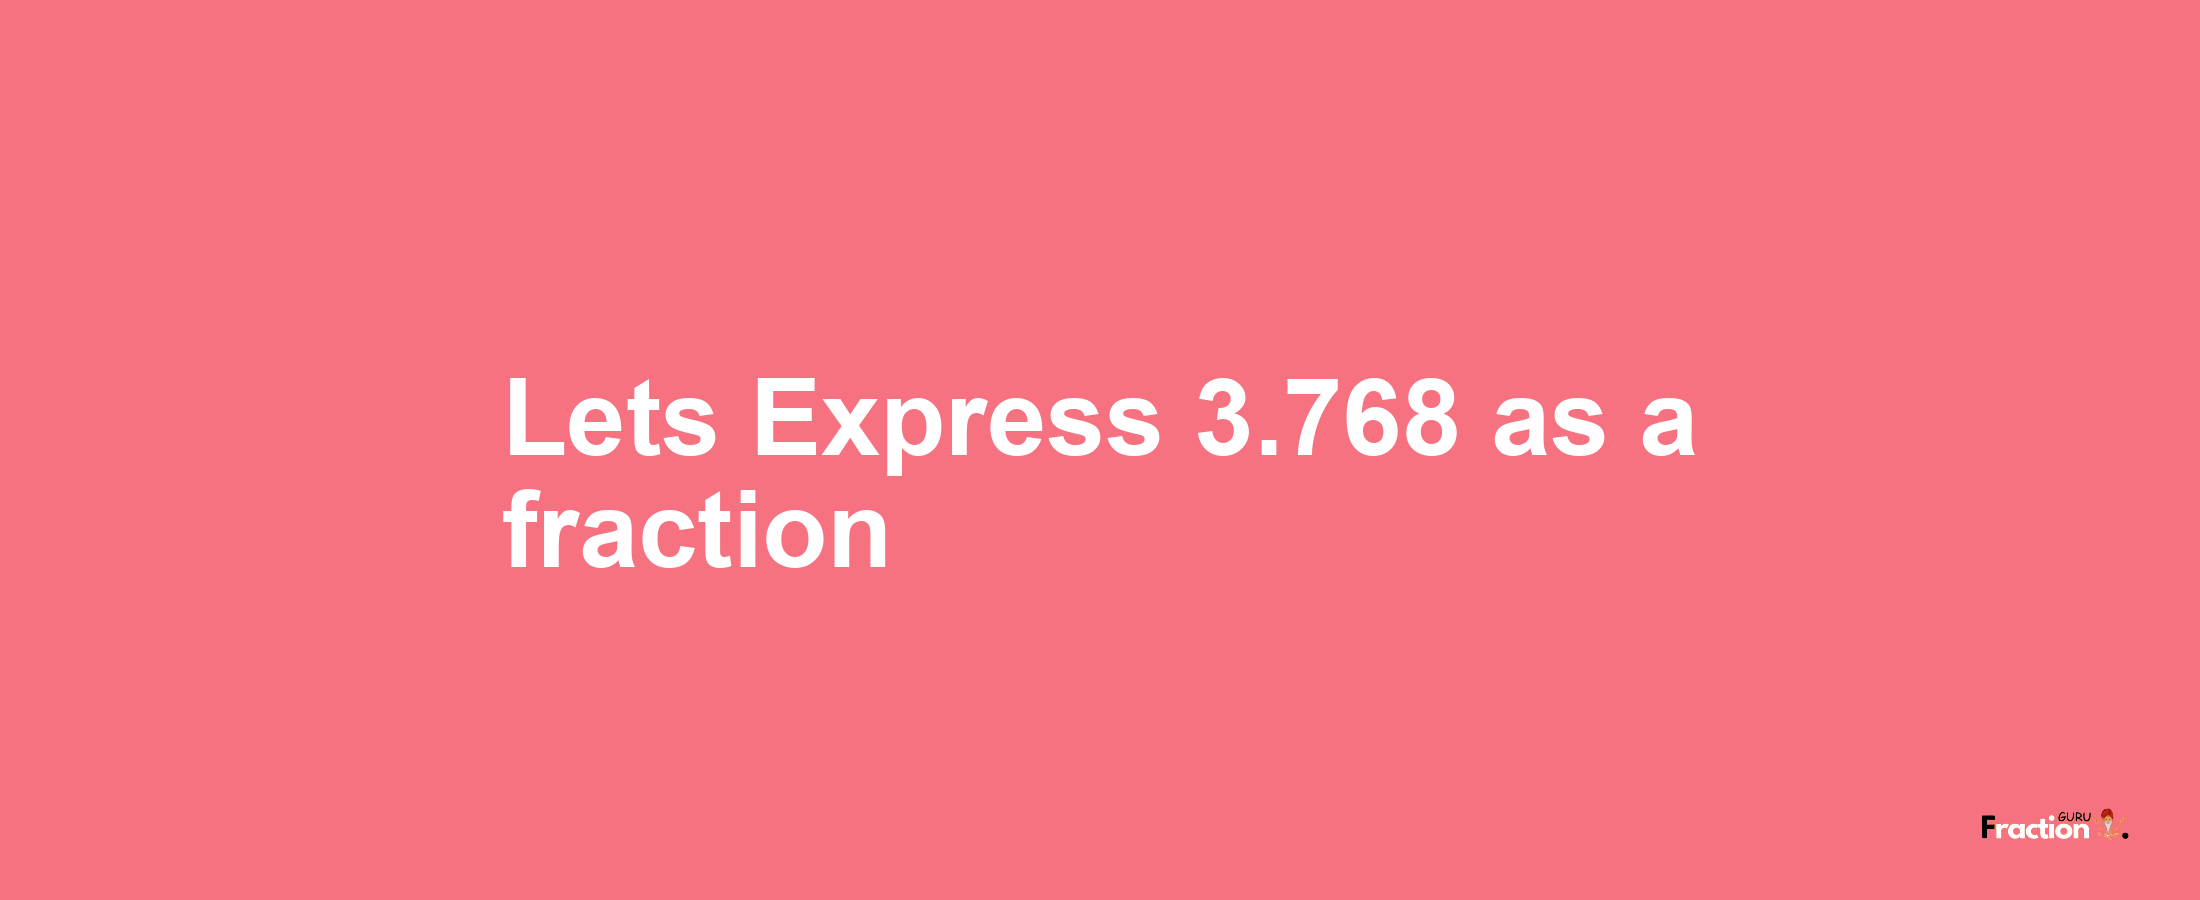 Lets Express 3.768 as afraction